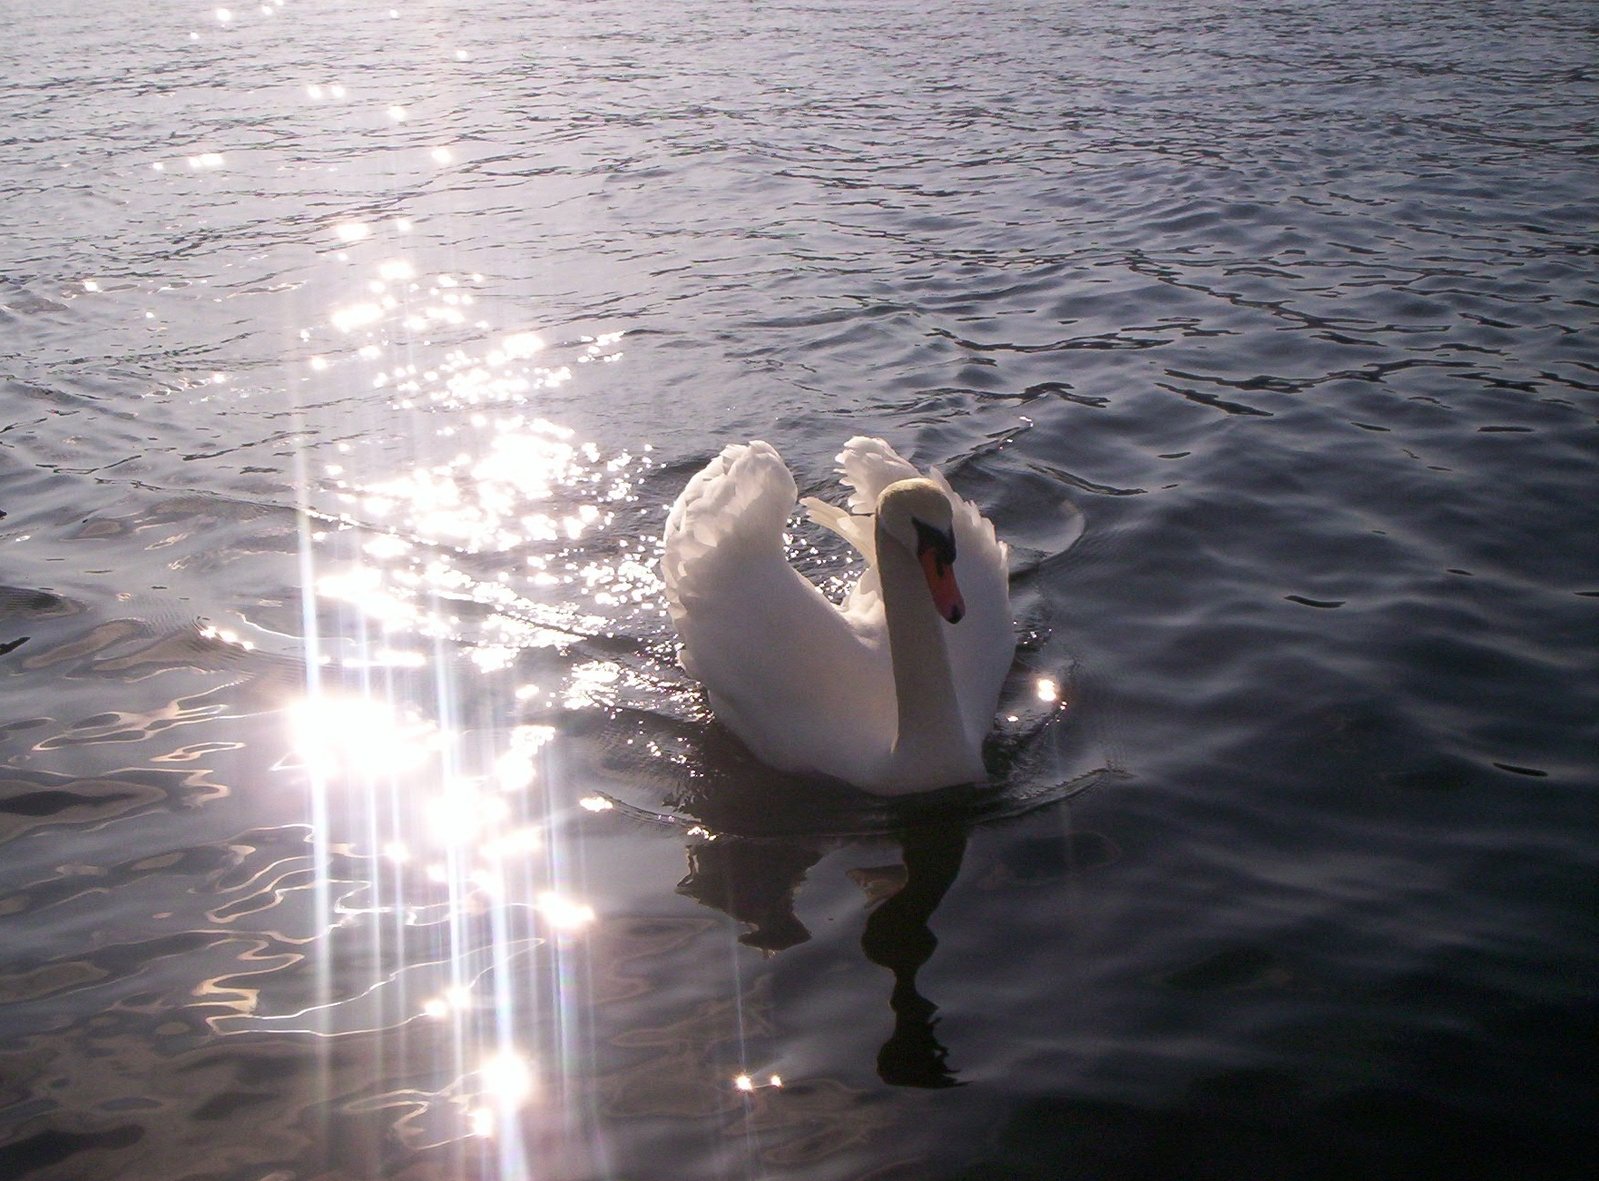 the swan is floating in the water outside